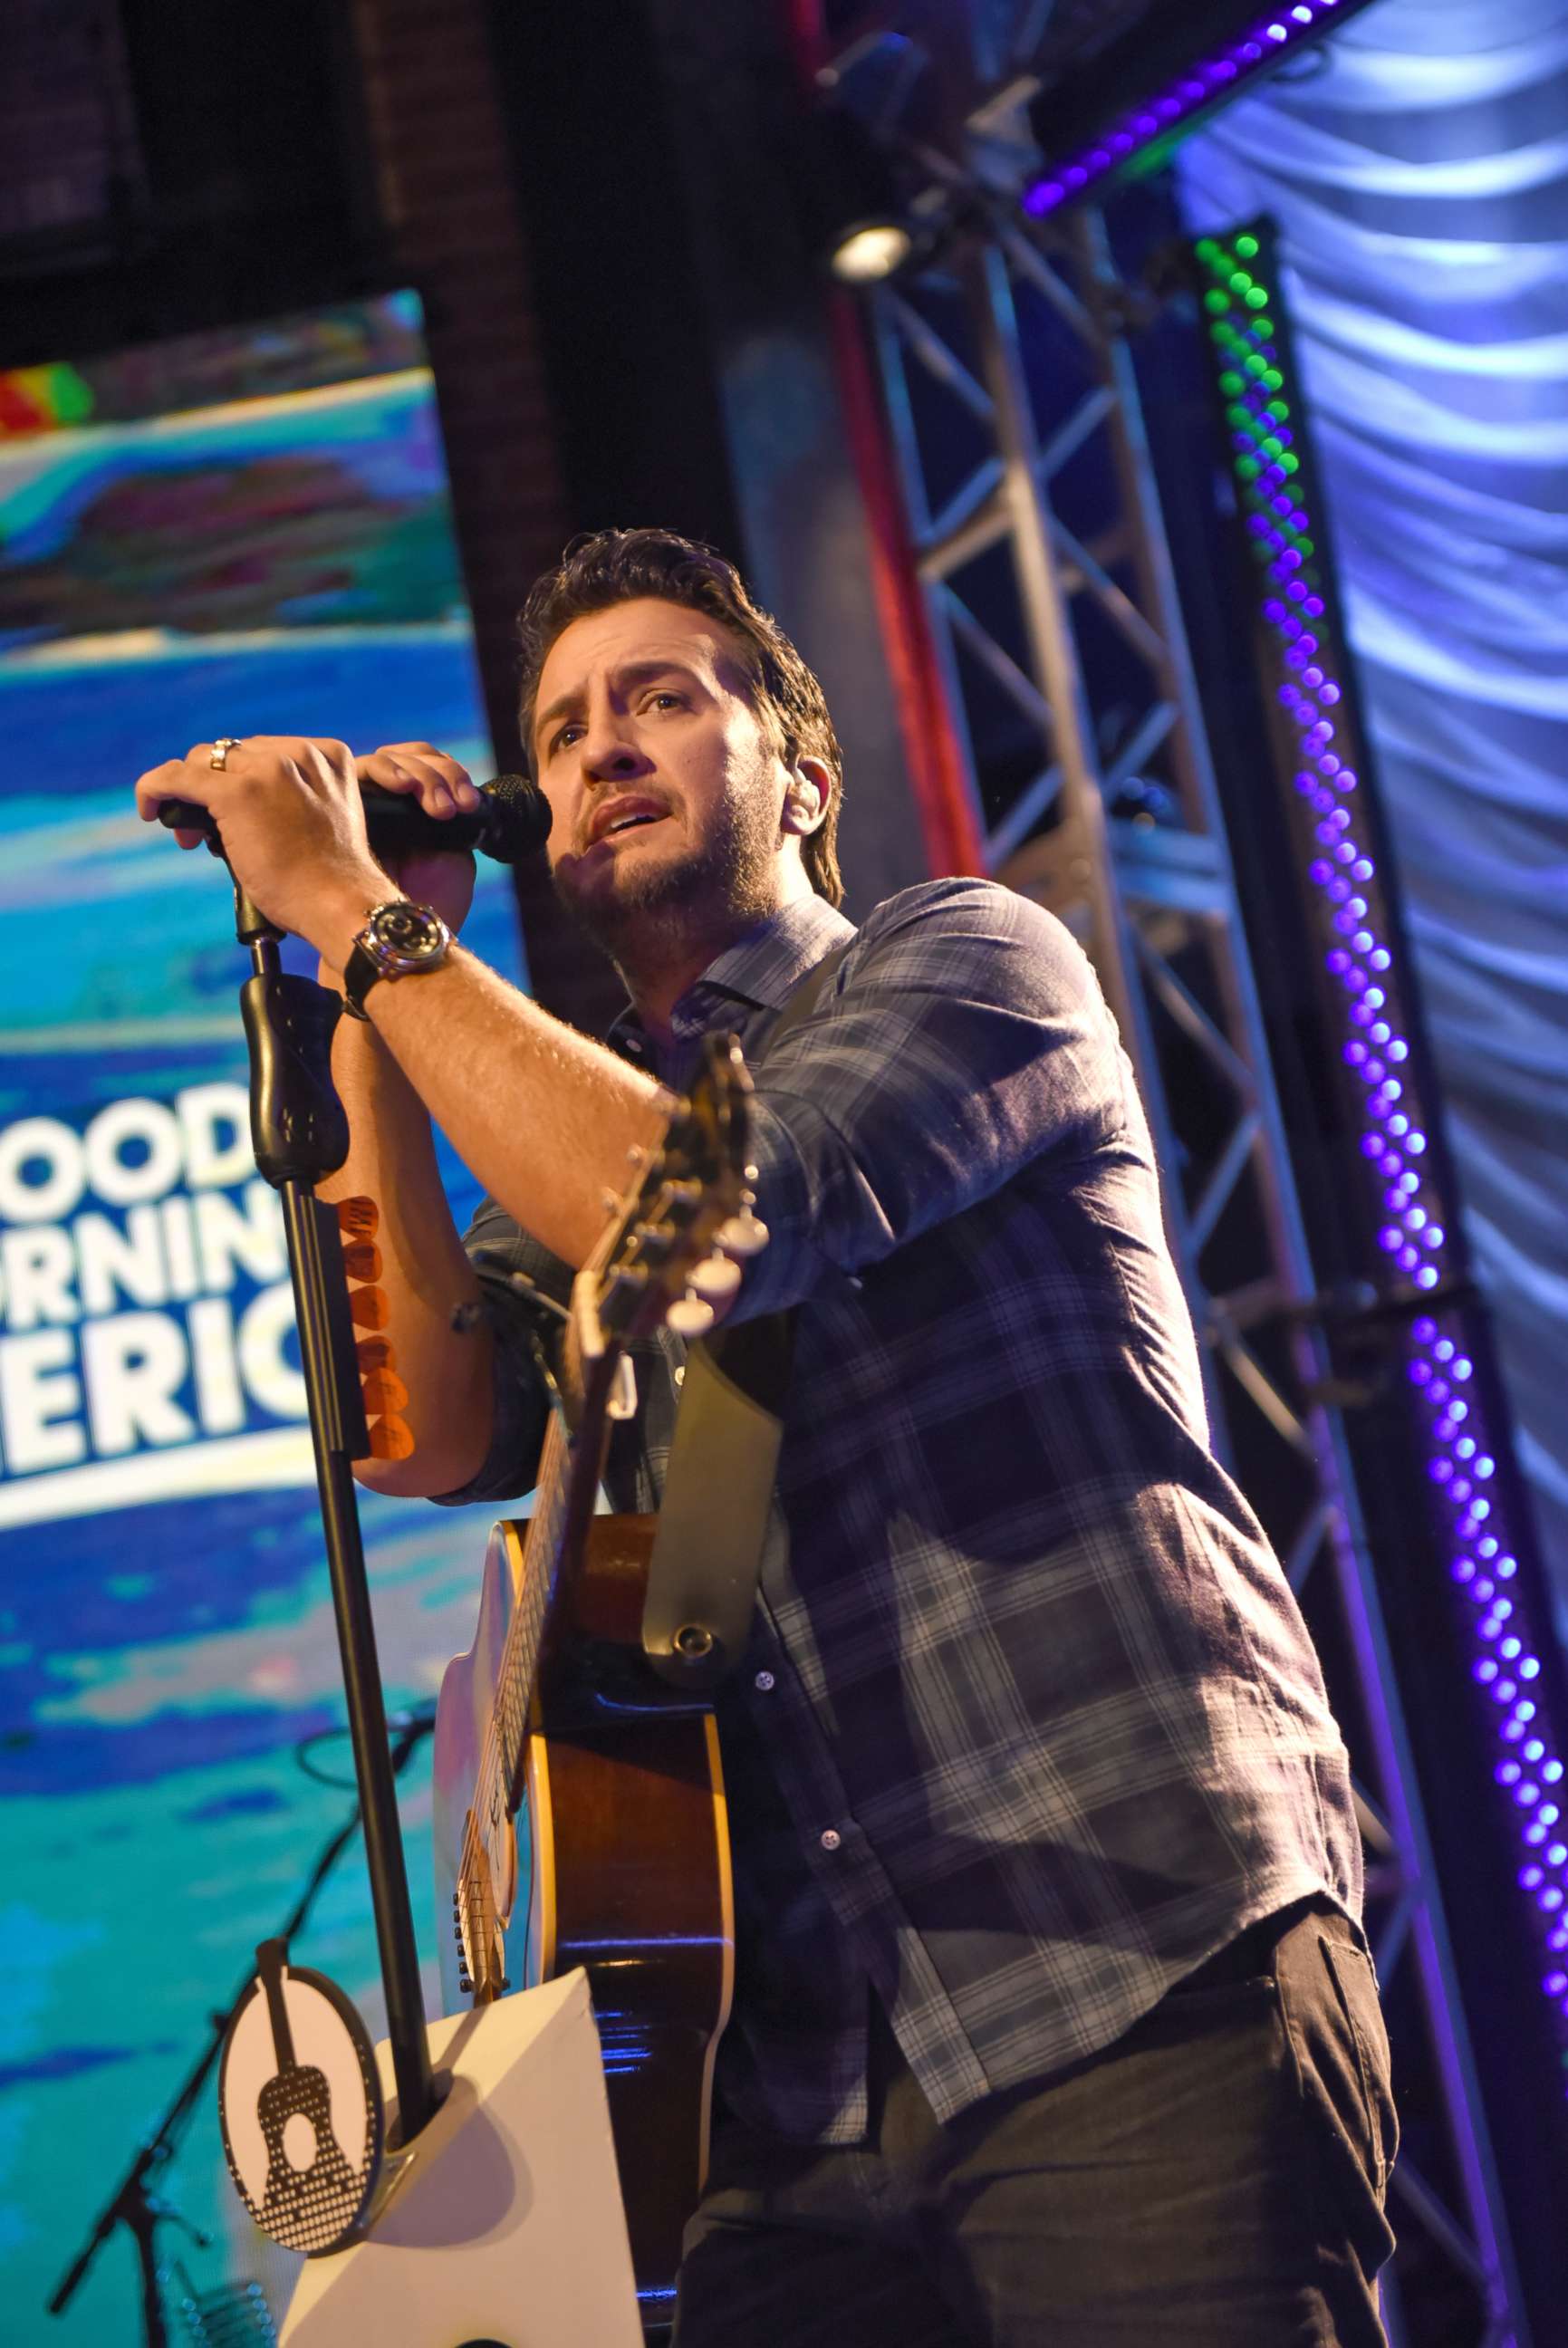 PHOTO: Luke Bryan performs on “Good Morning America” from the new Opry City Stage in New York City’s Times Square, Dec. 8, 2017.